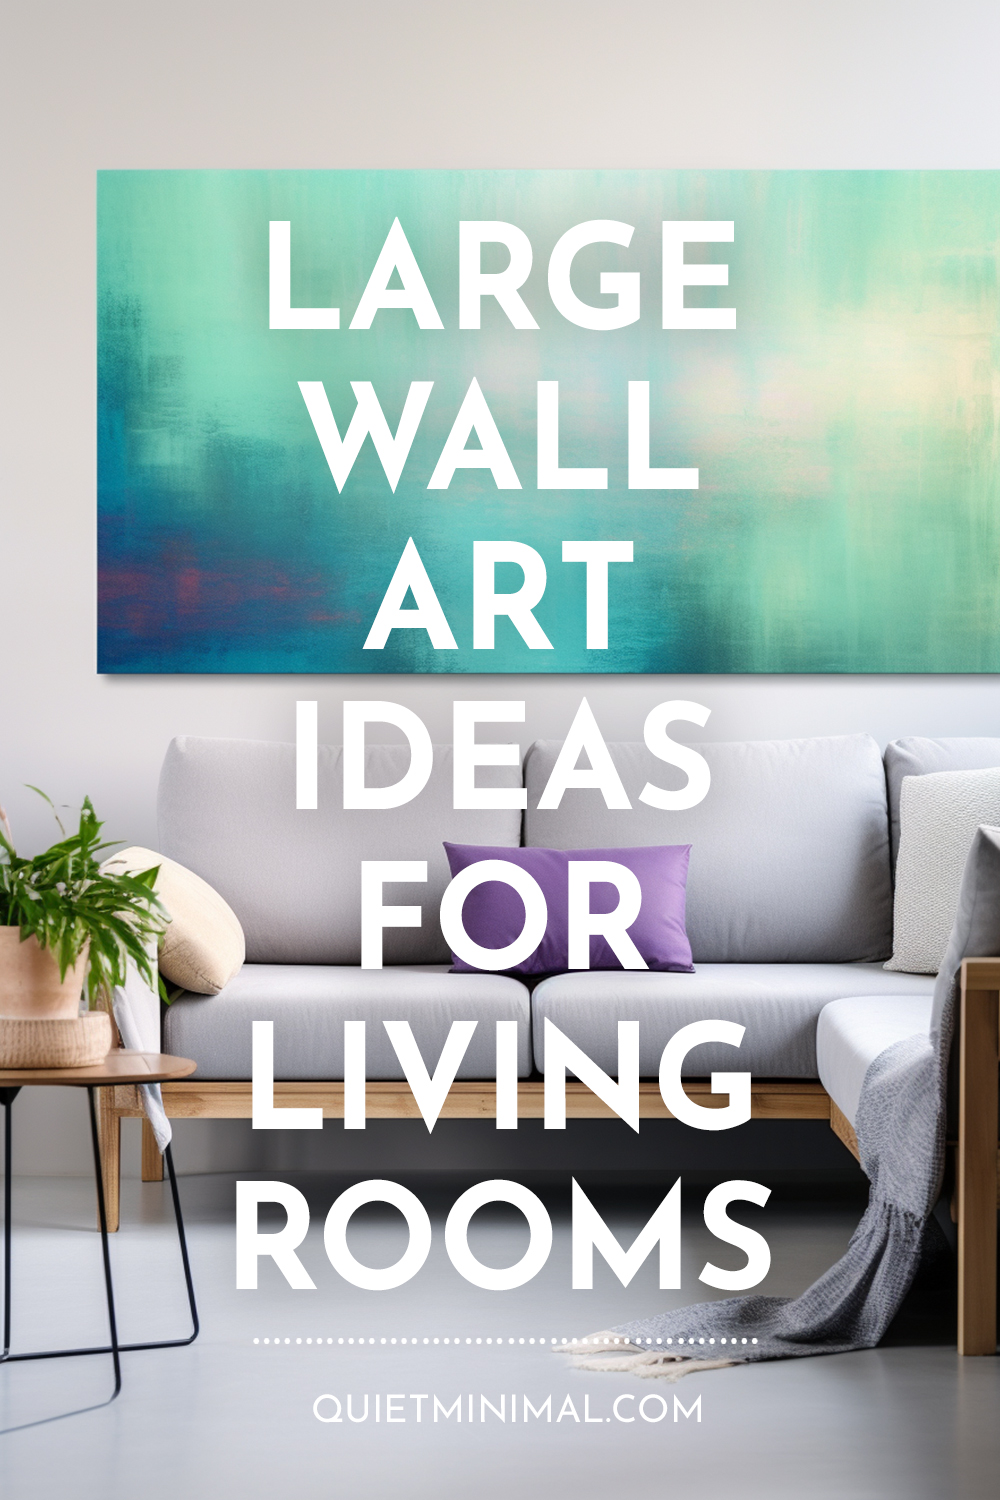 Large wall art for living rooms.